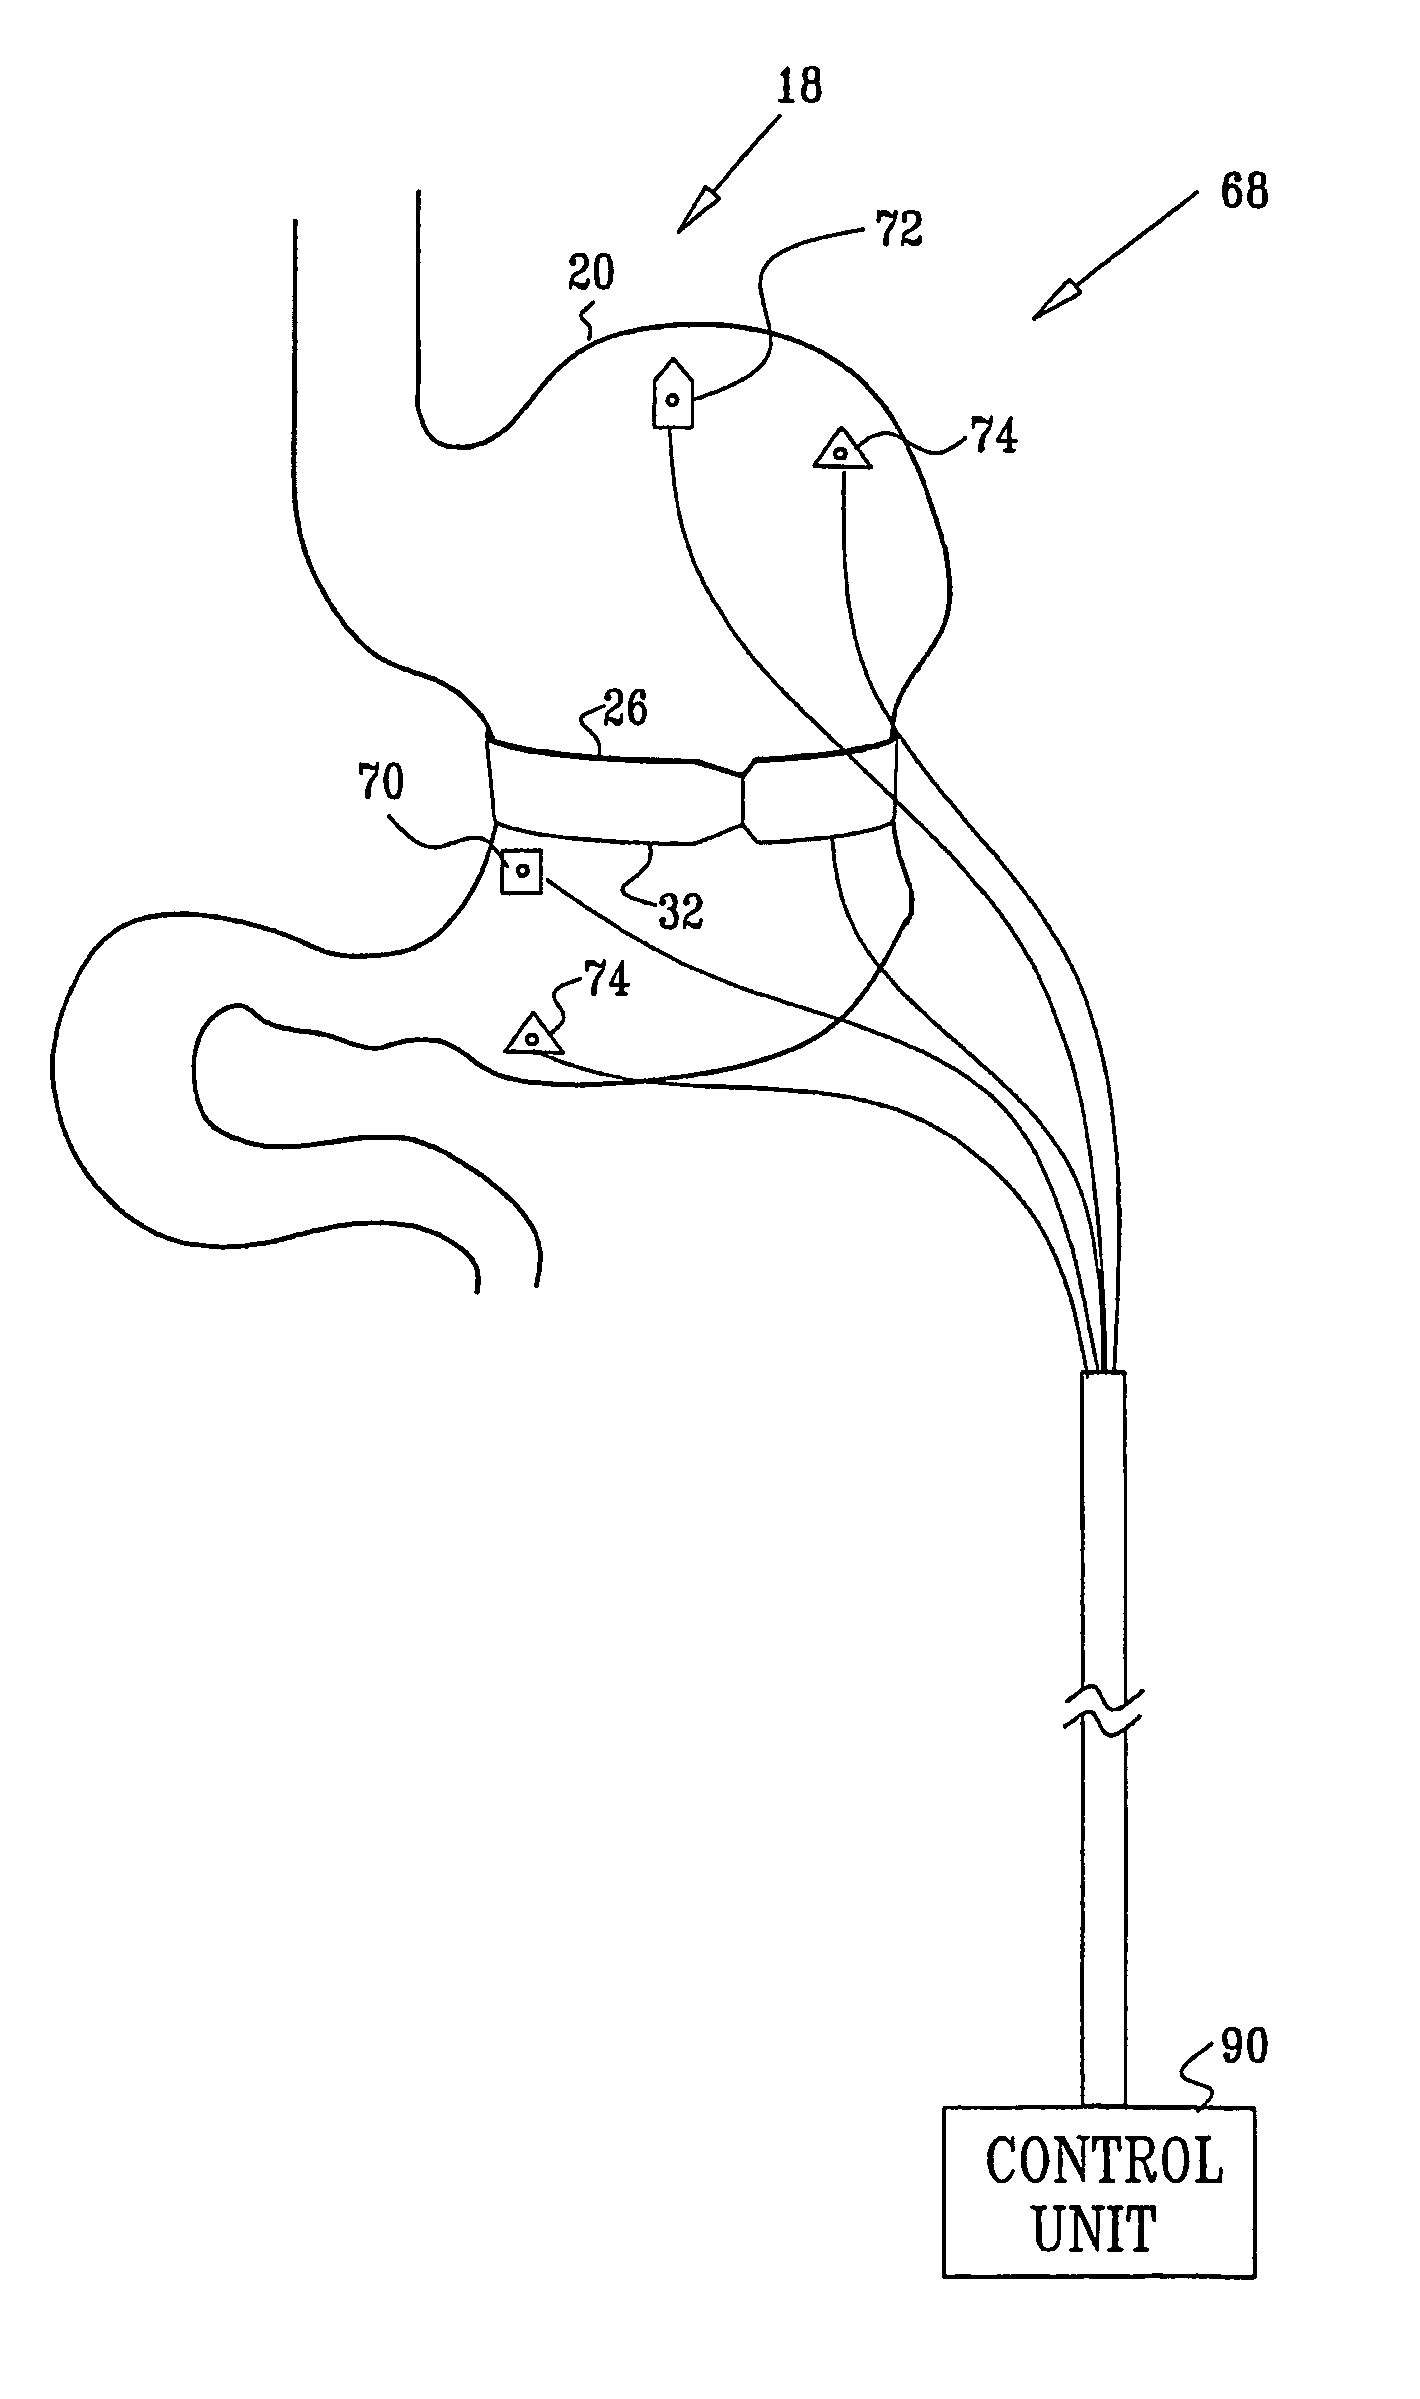 Gastrointestinal methods and apparatus for use in treating disorders and controlling blood sugar